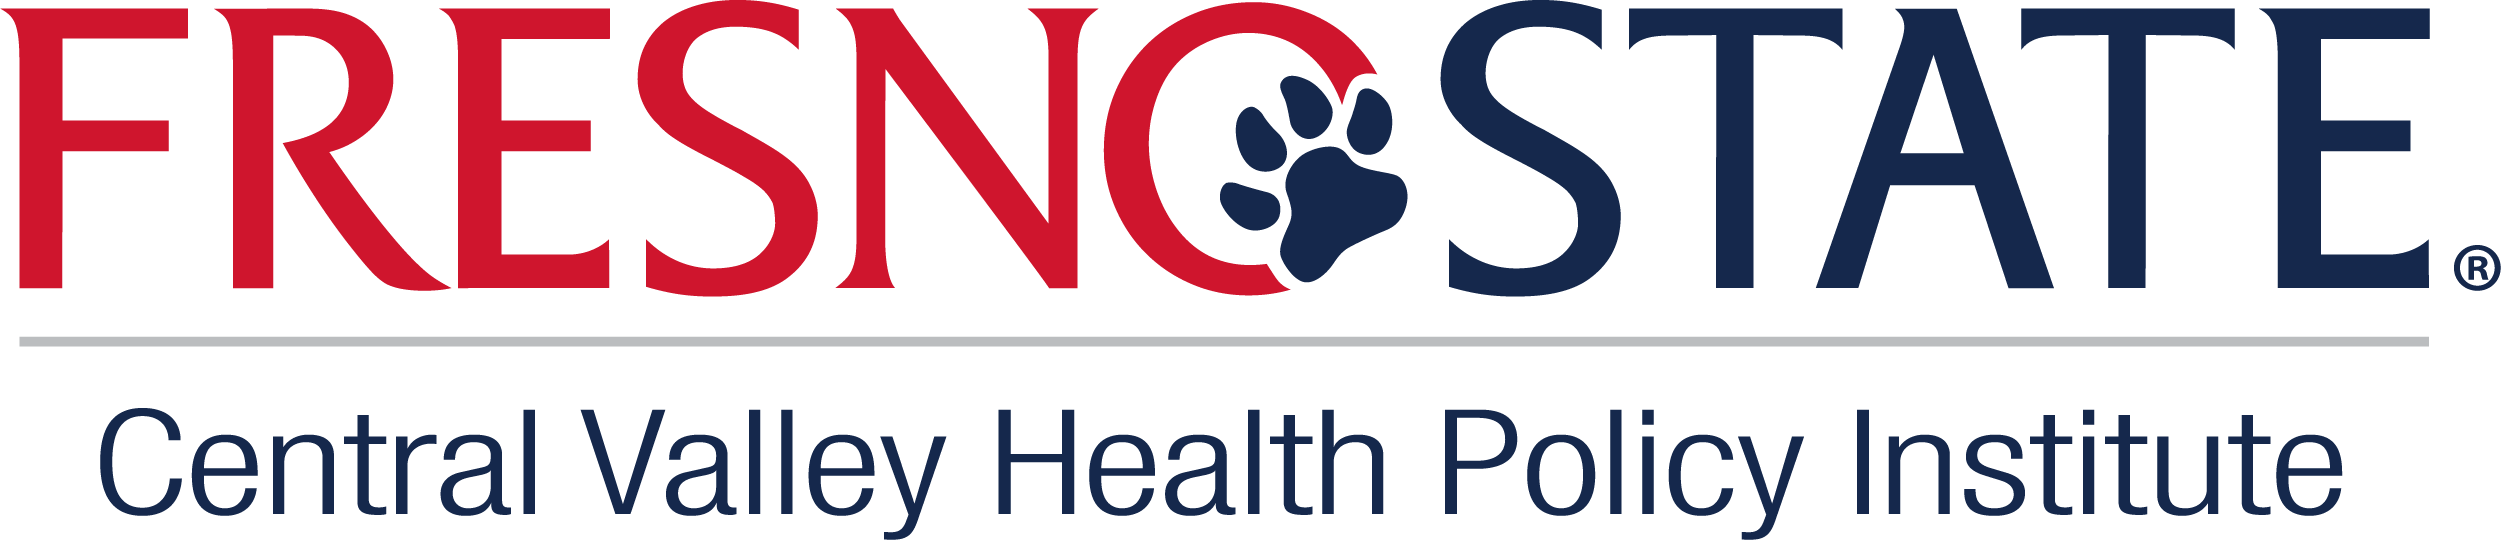 Central Valley Health Policy Institute Logo